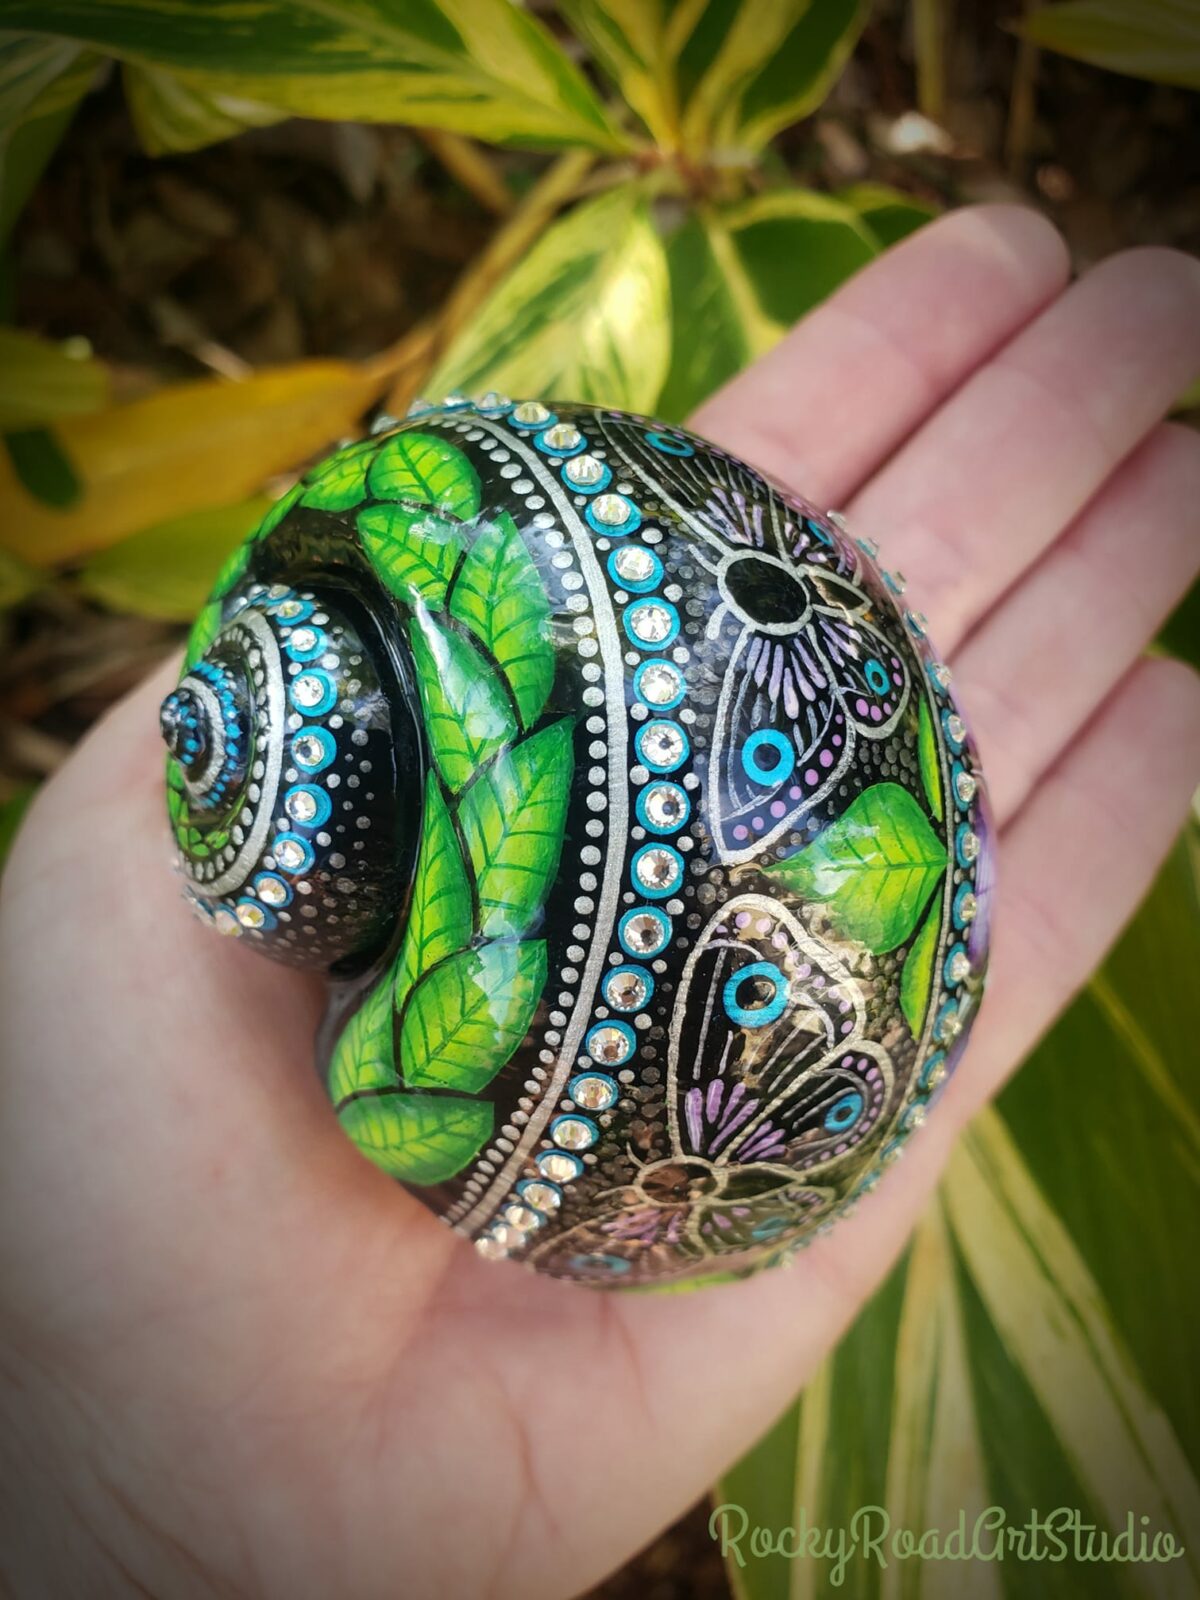 Snail Shells Decorated With Gorgeous Patterns By Lisa Orlans 4